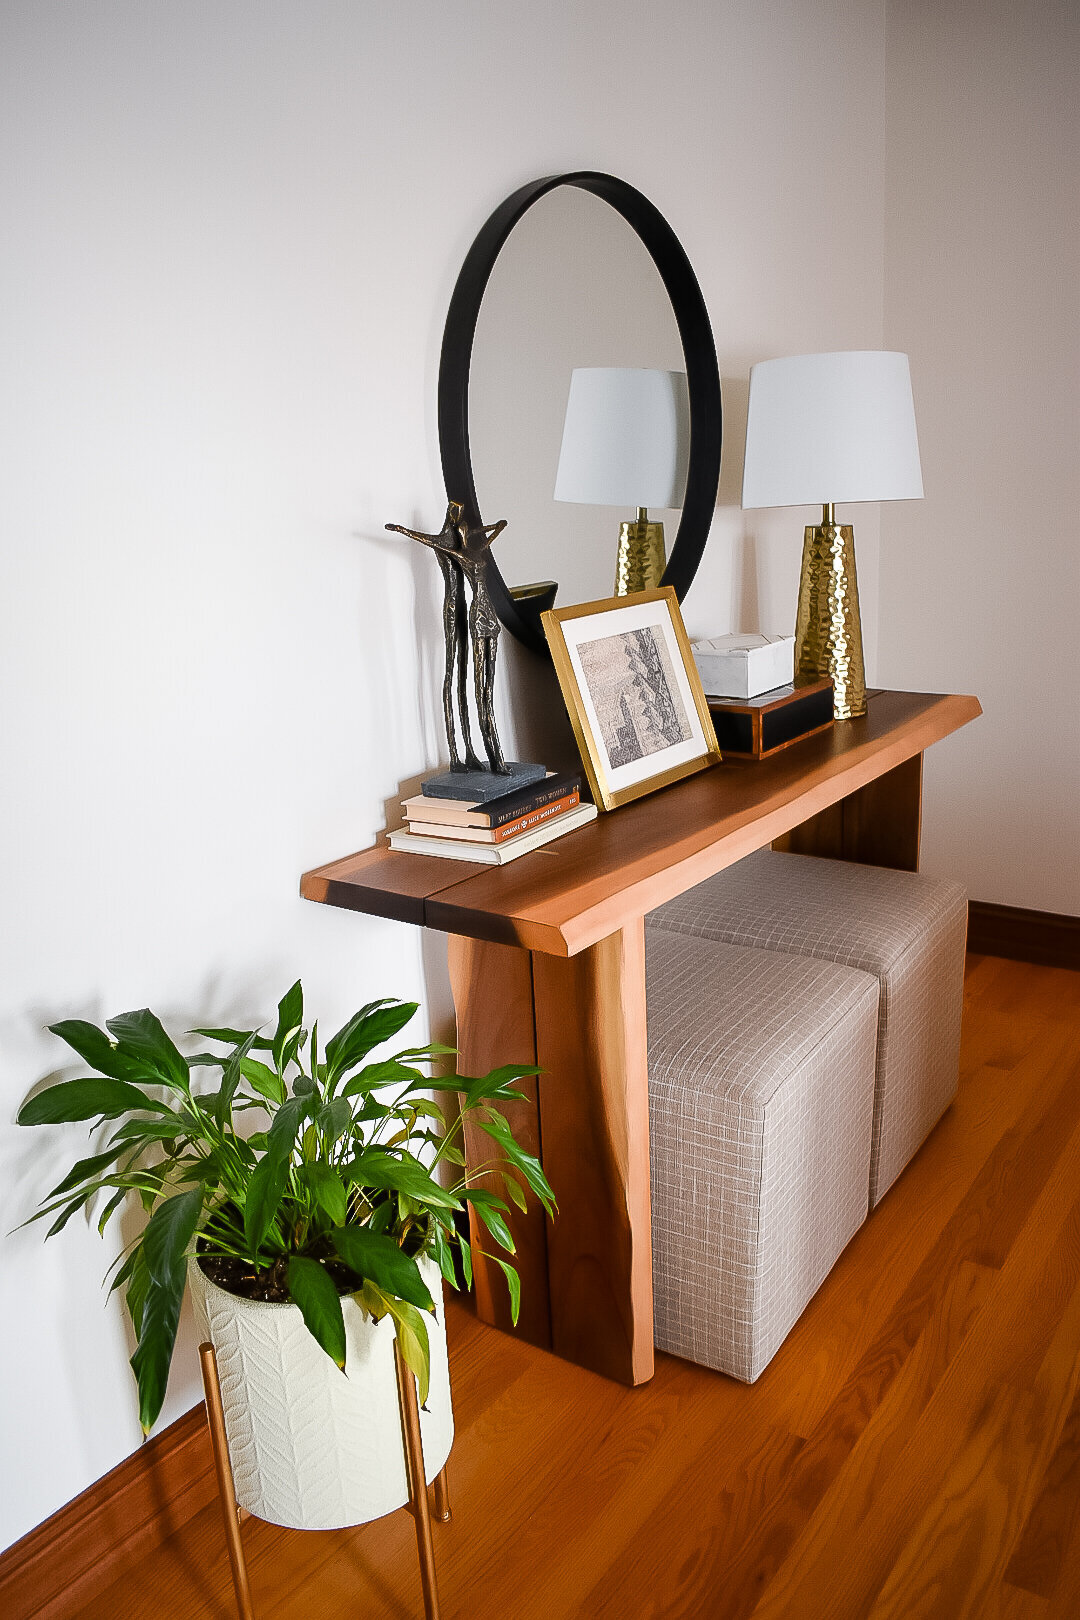 A plant sits in a plant stand next to a wooden console table